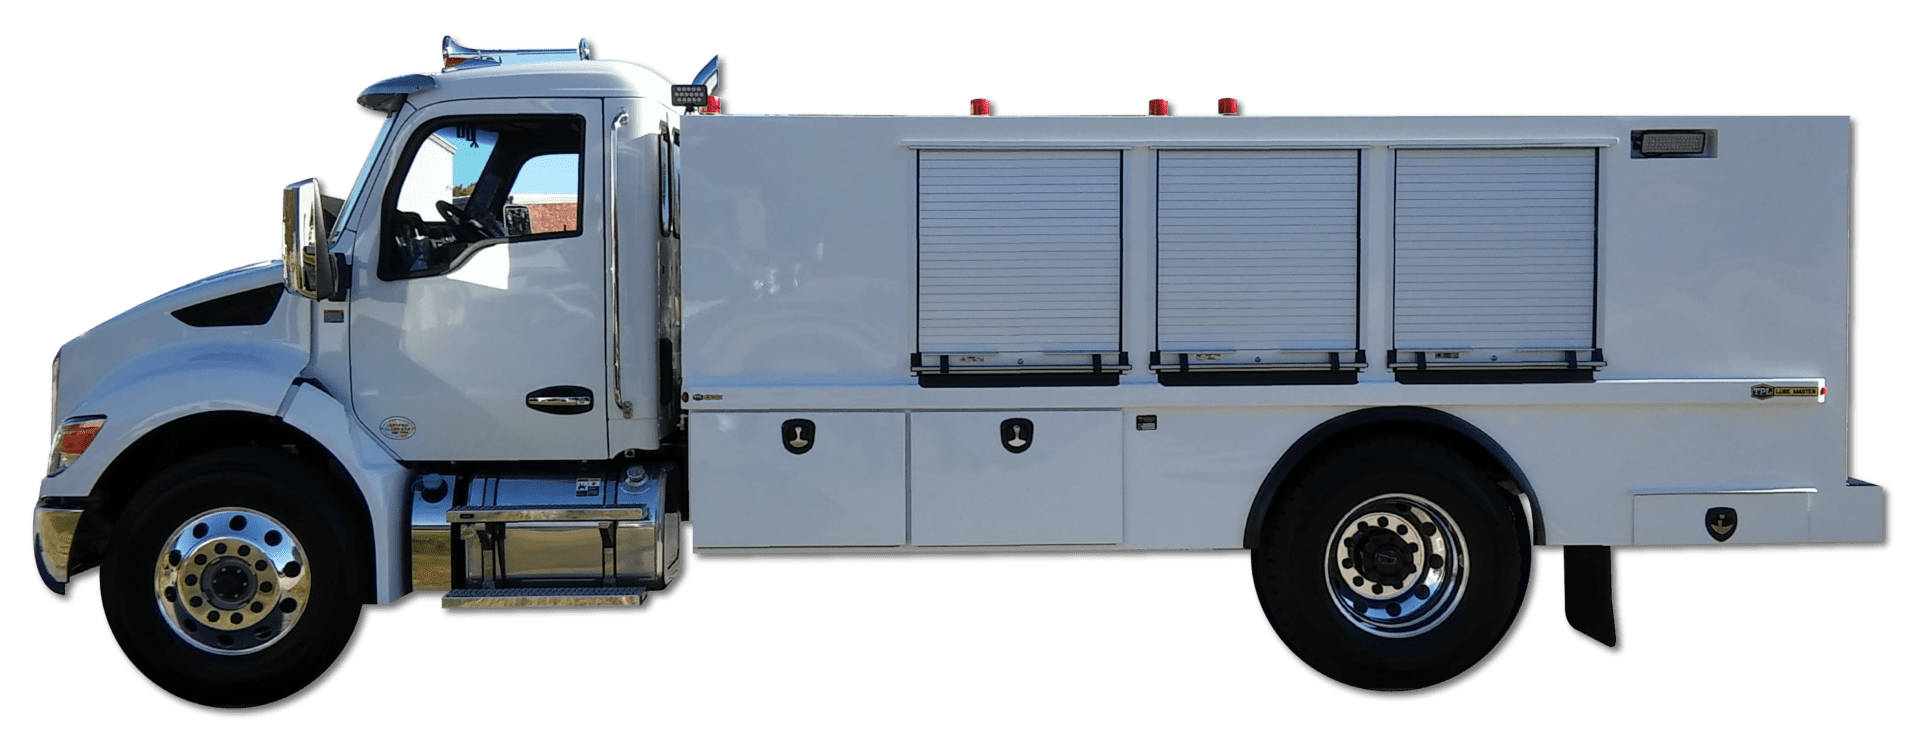 A large white truck with two doors and wheels.